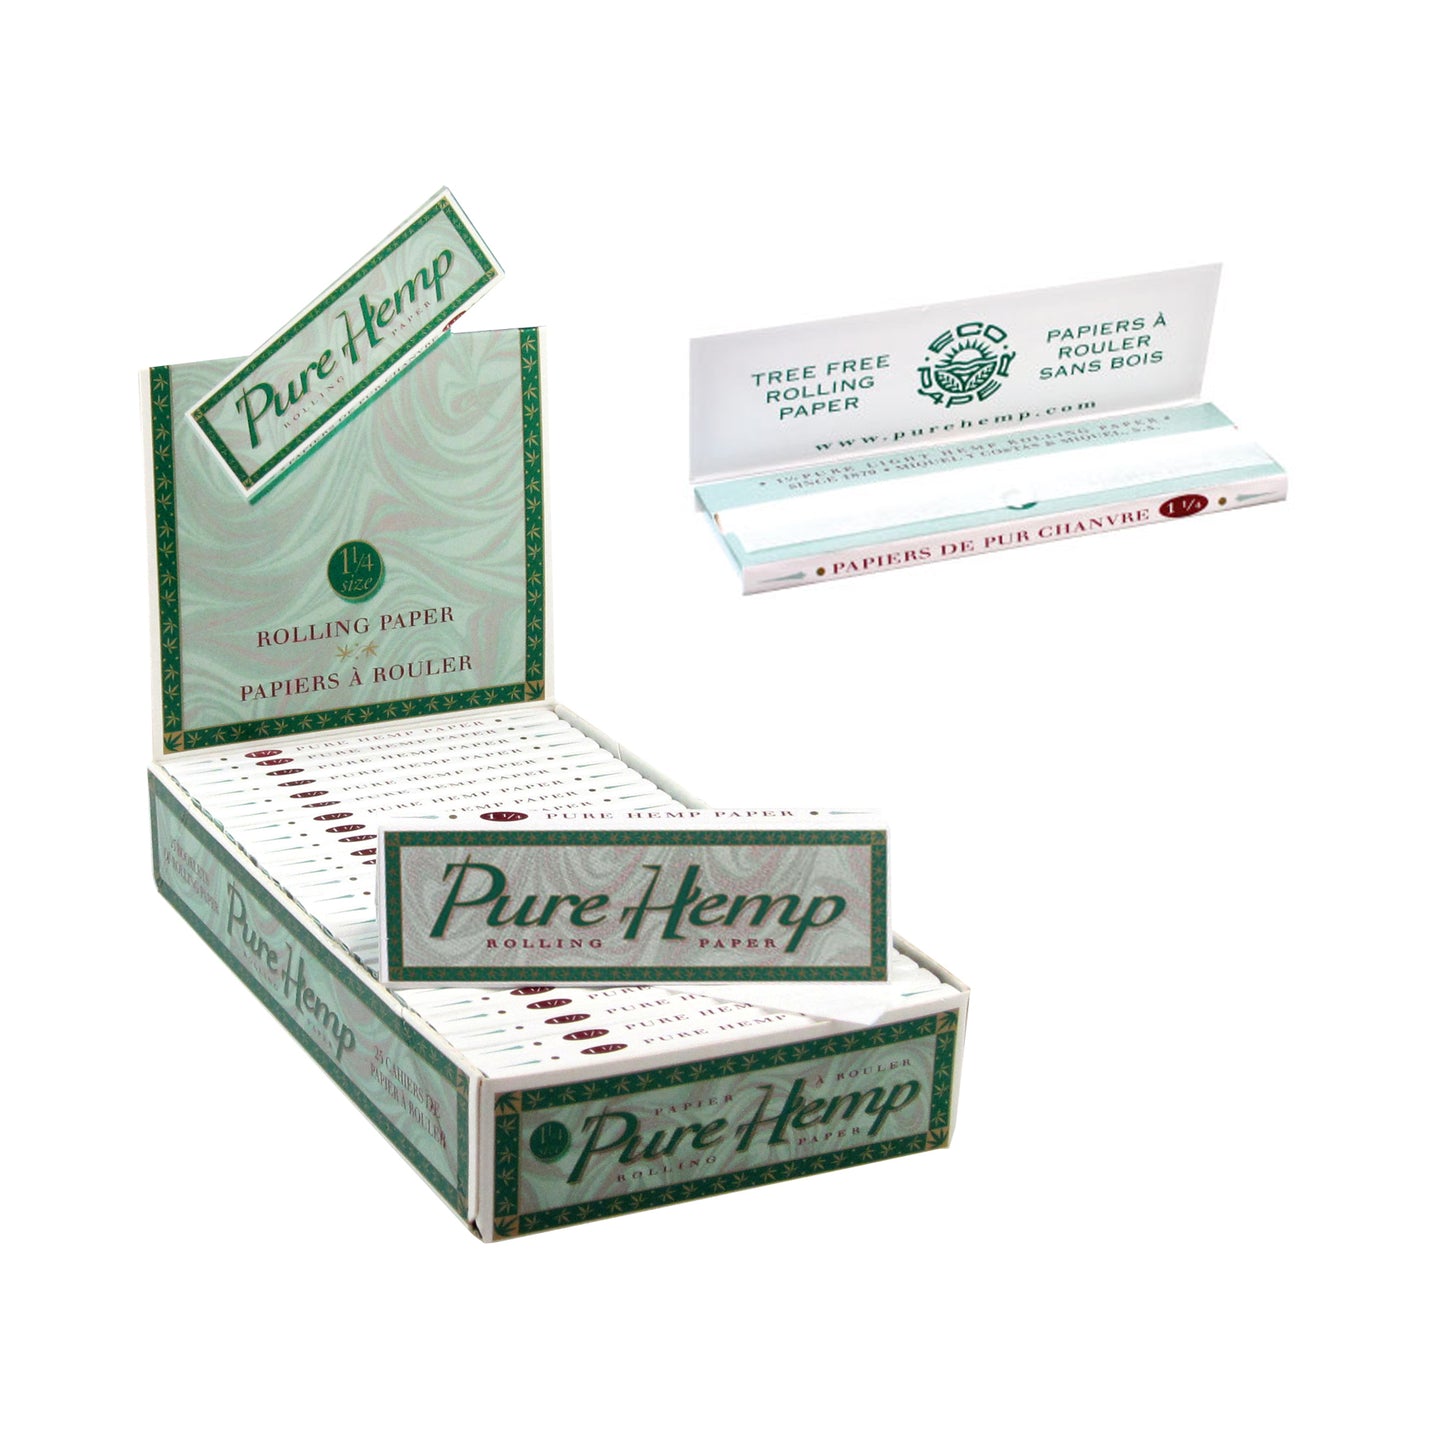 Pure Hemp Classic 1 1/4 Size Rolling Papers Booklet Box